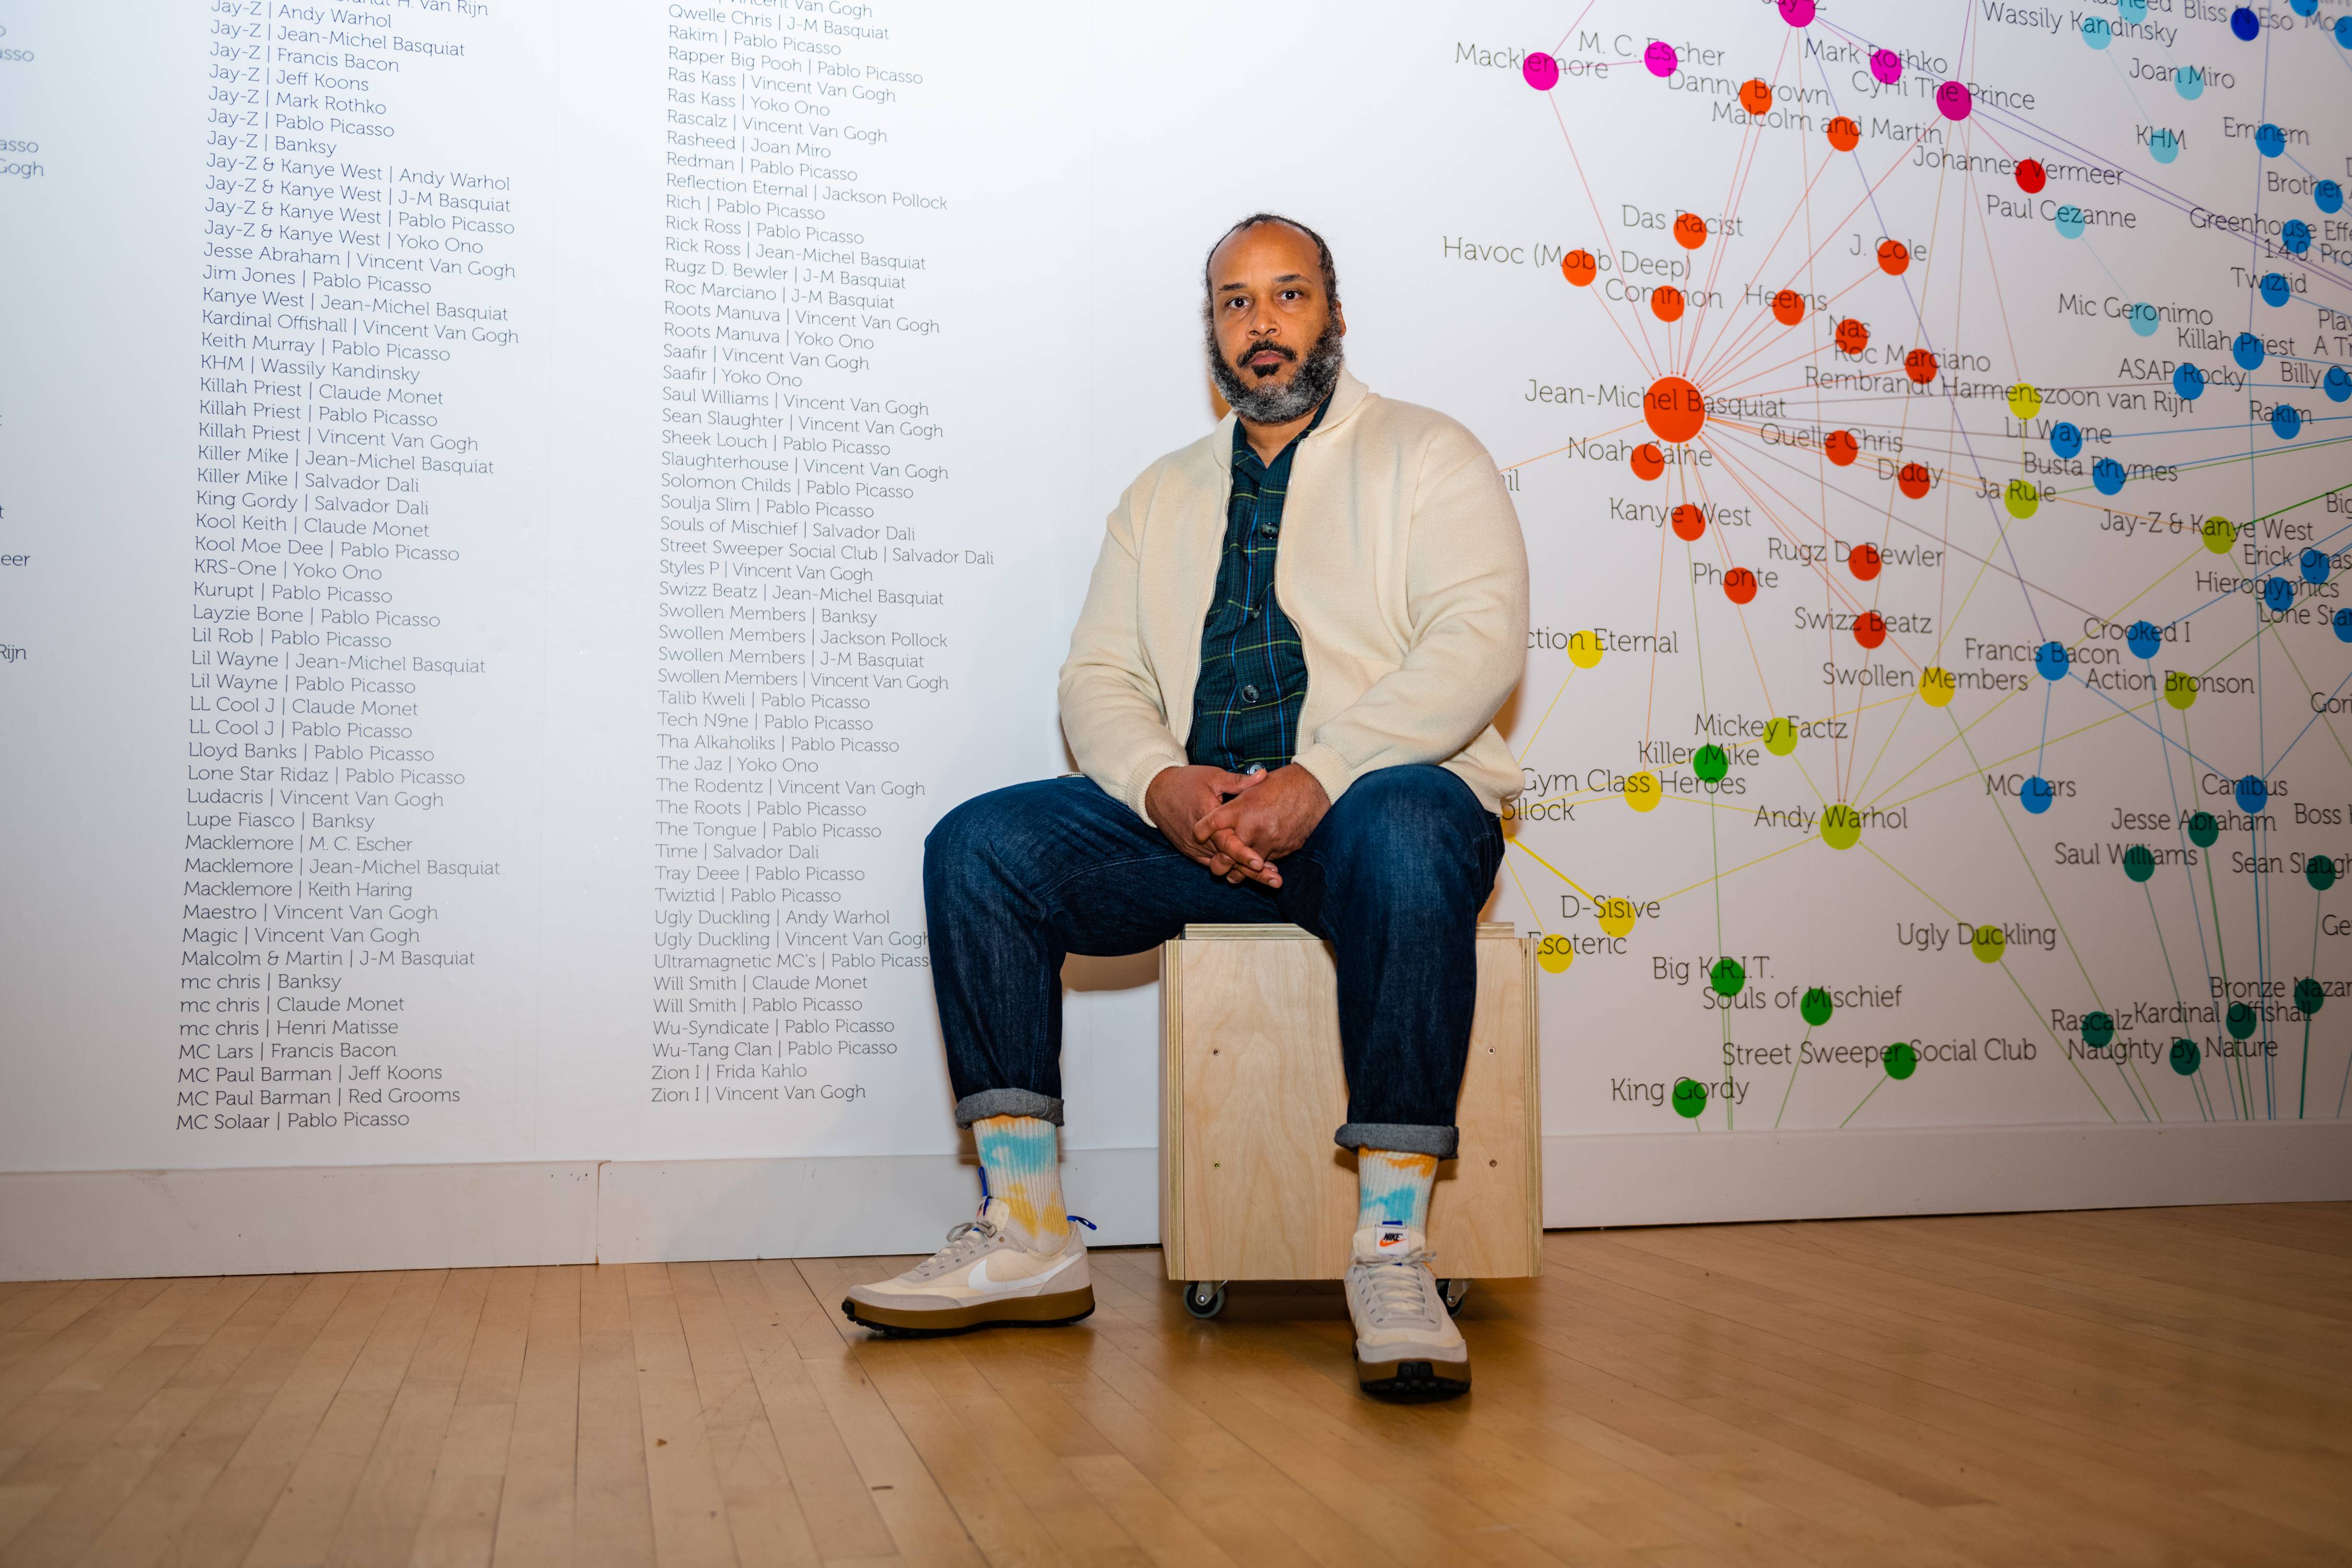 Tahir Hemphill takes a portrait in his exhibition focused on his many multimedia works, and data visualization in his gallery space at UMBC in Baltimore, Md., on February 2, 2023.